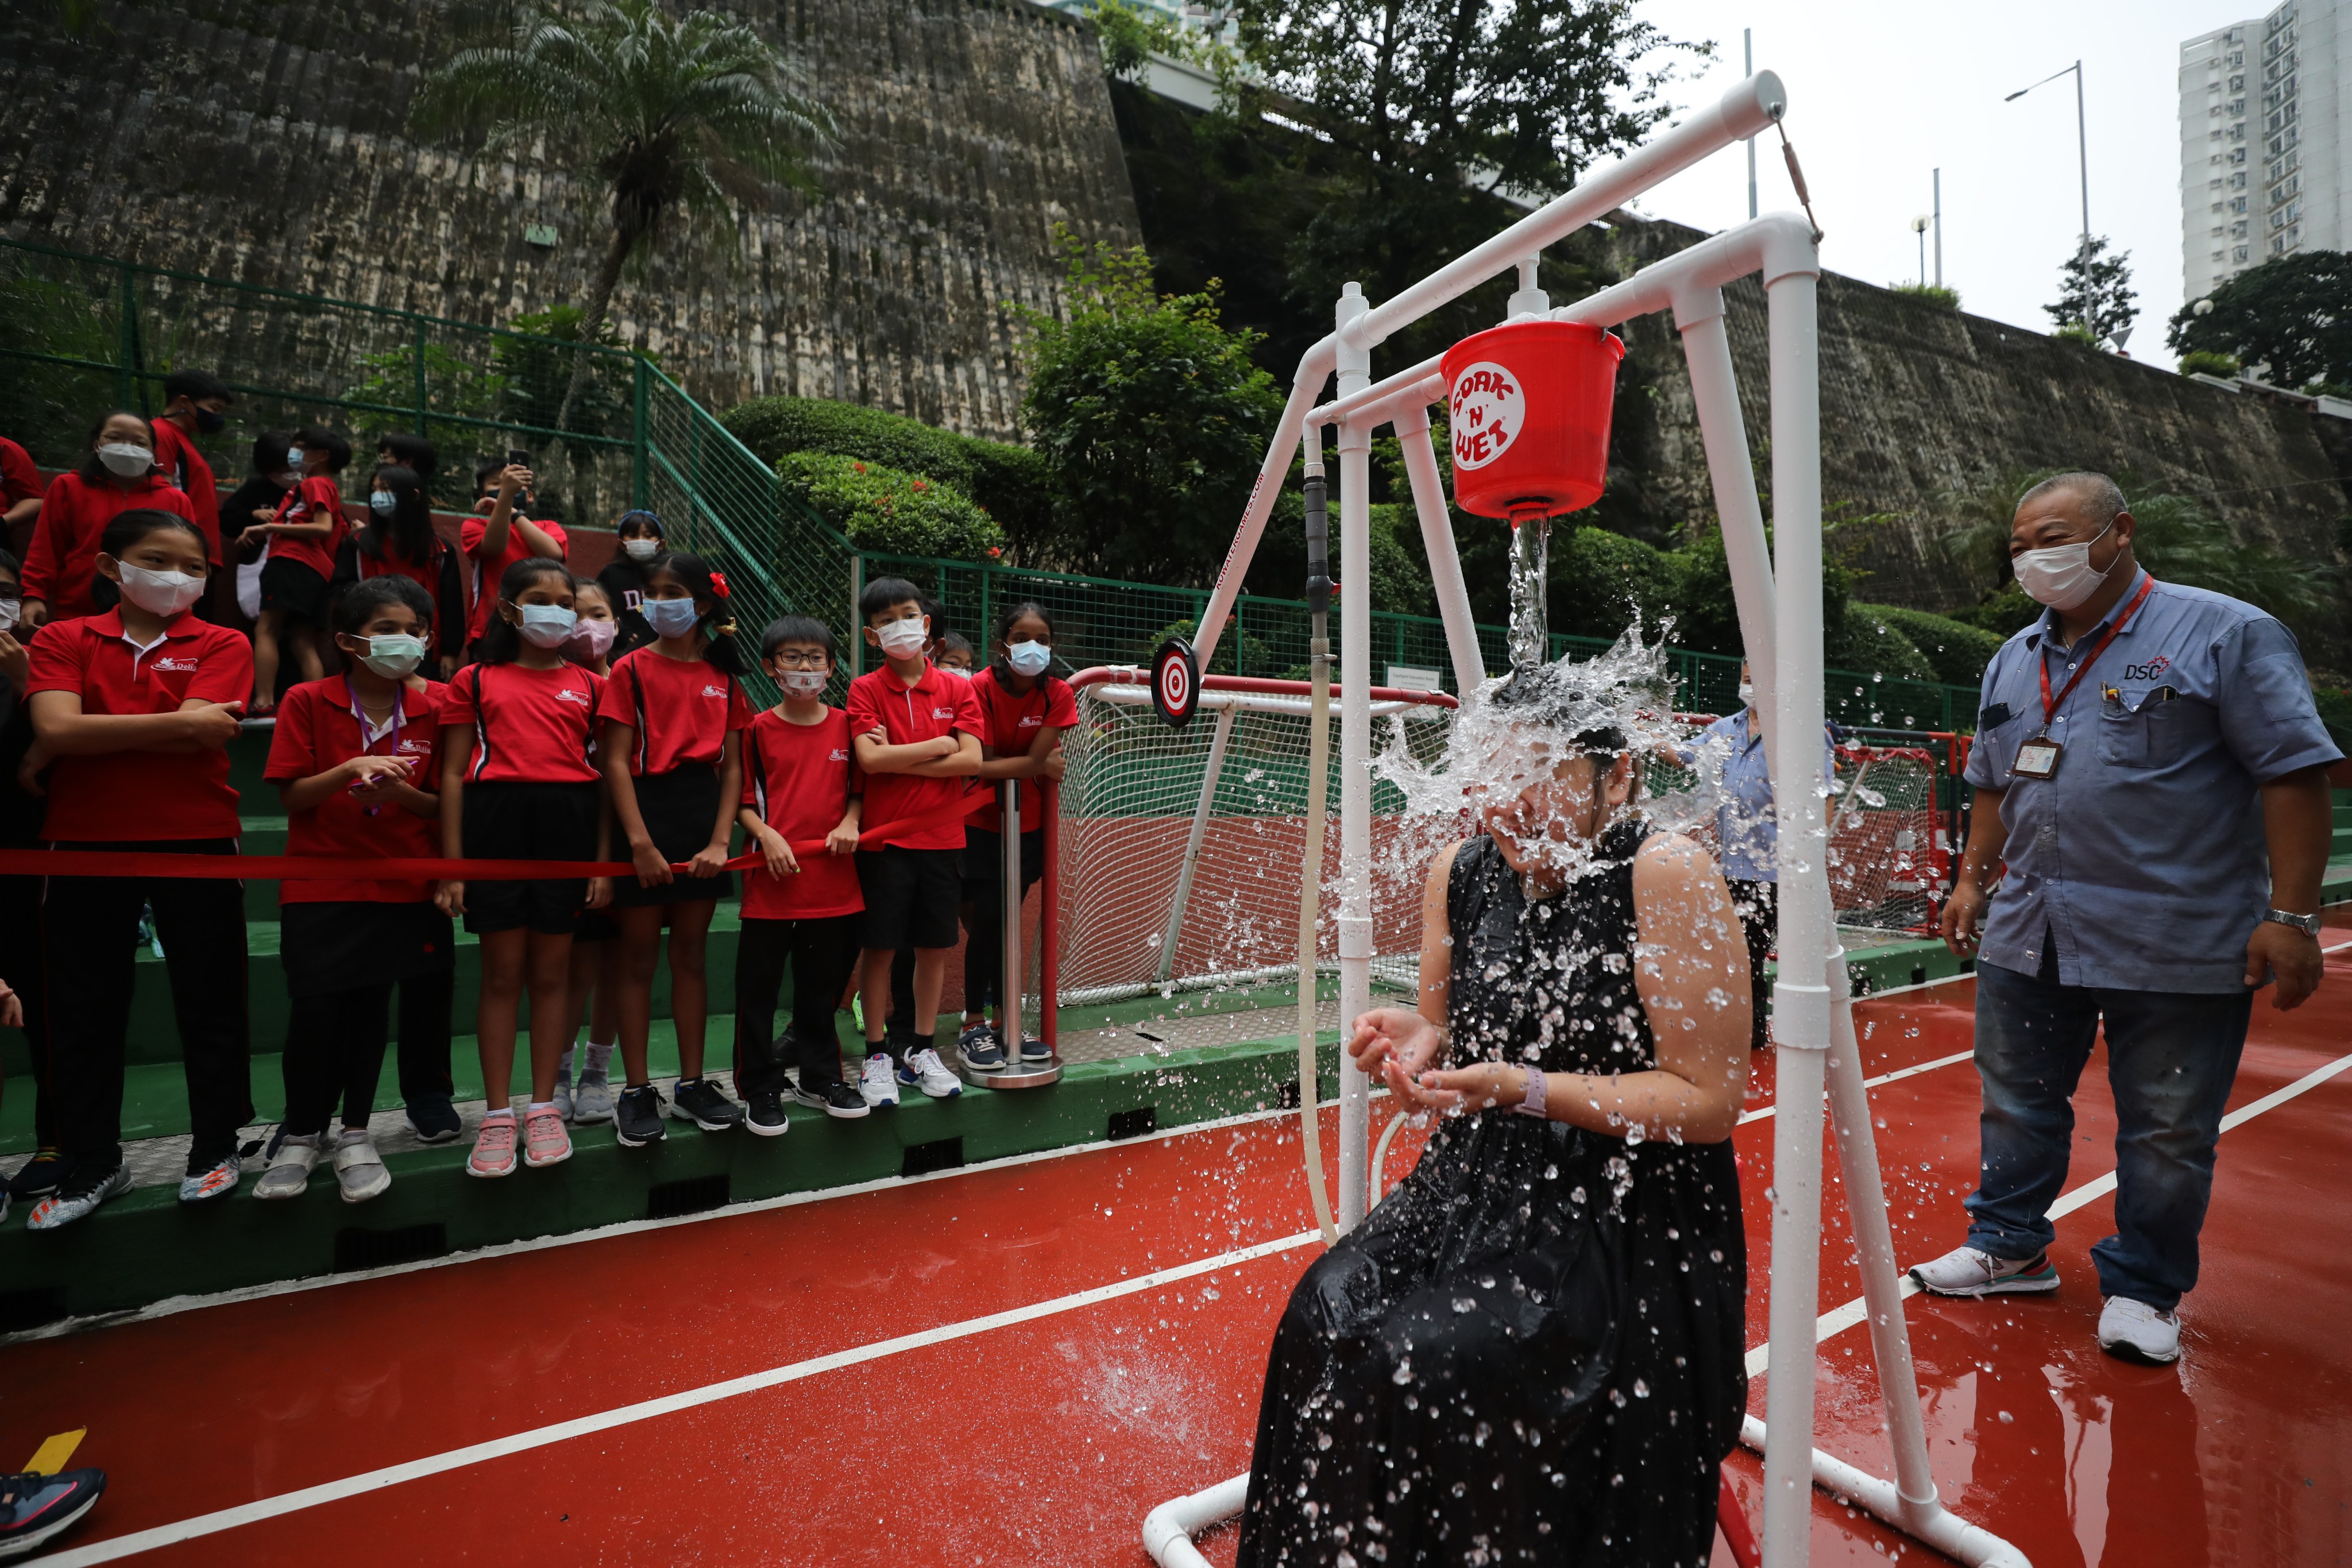 Wanda Wong, a teacher at DSC International School of Canada, takes part in the Dunk Tank Challenge to raise money for charity. Photo: Xiaomei Chen